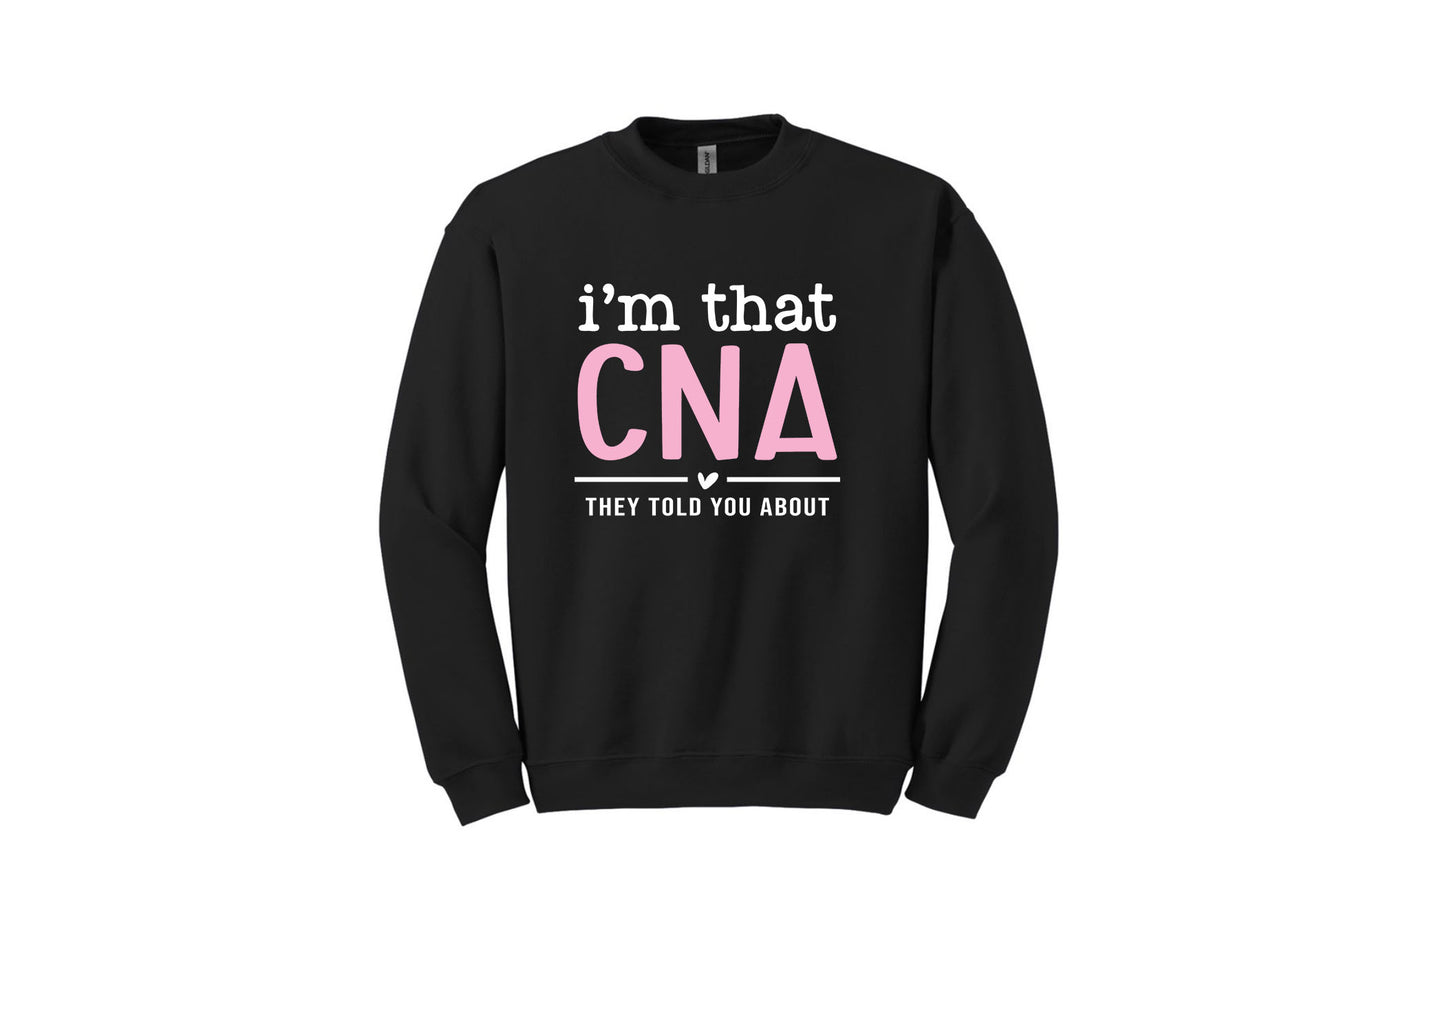 I'm THAT CNA they told you about